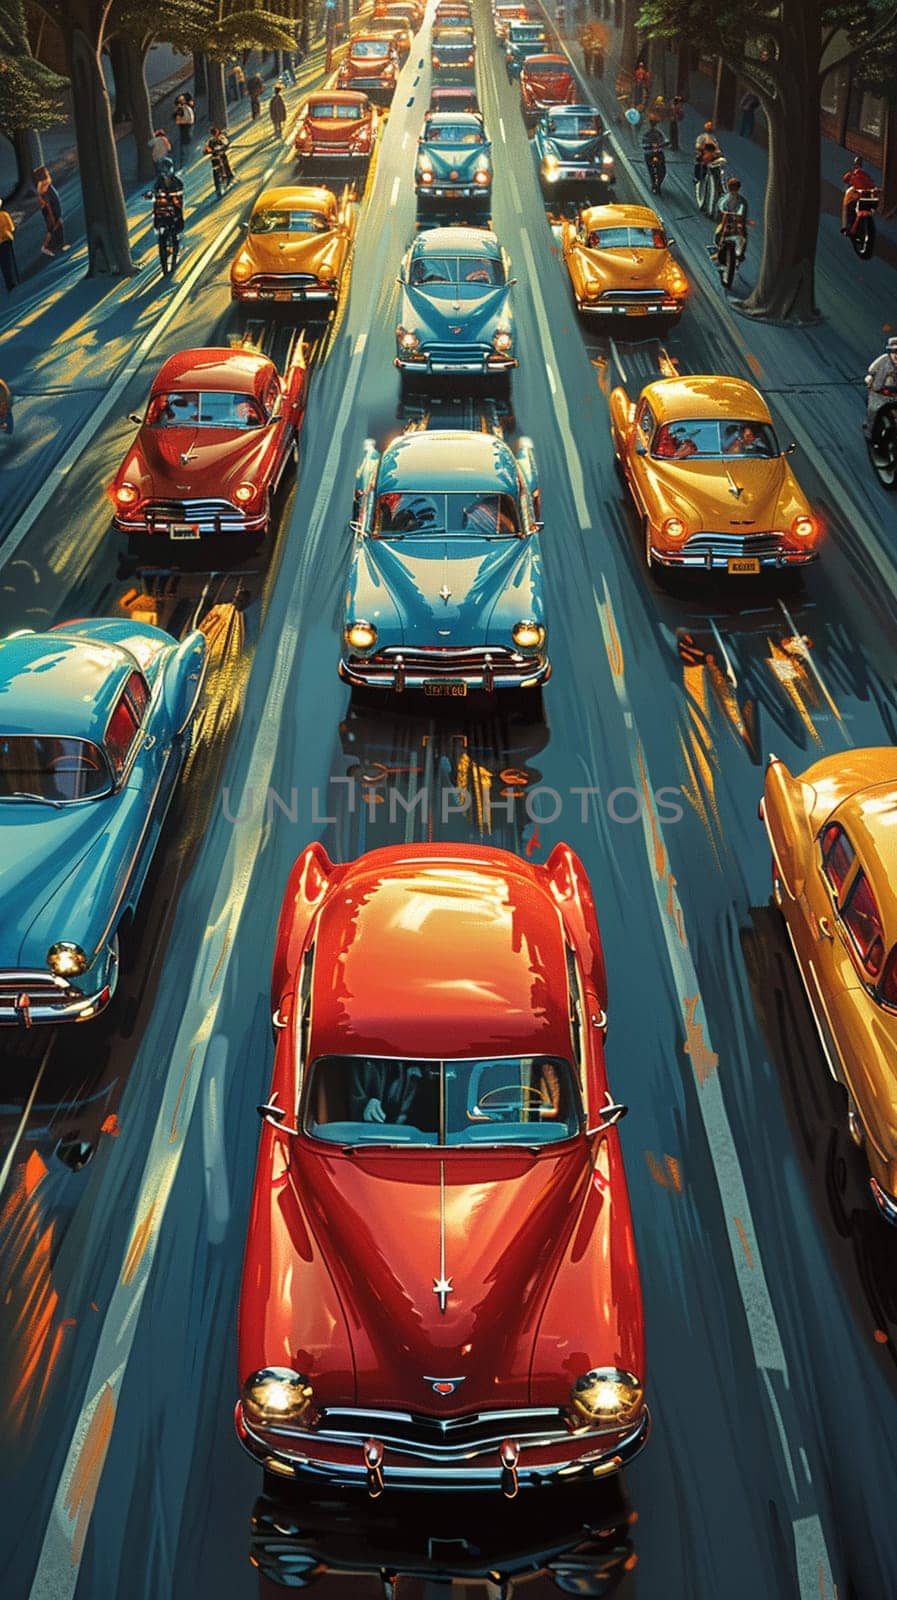 Vintage car rally scene with colorful automobiles illustrated in a lively by Benzoix